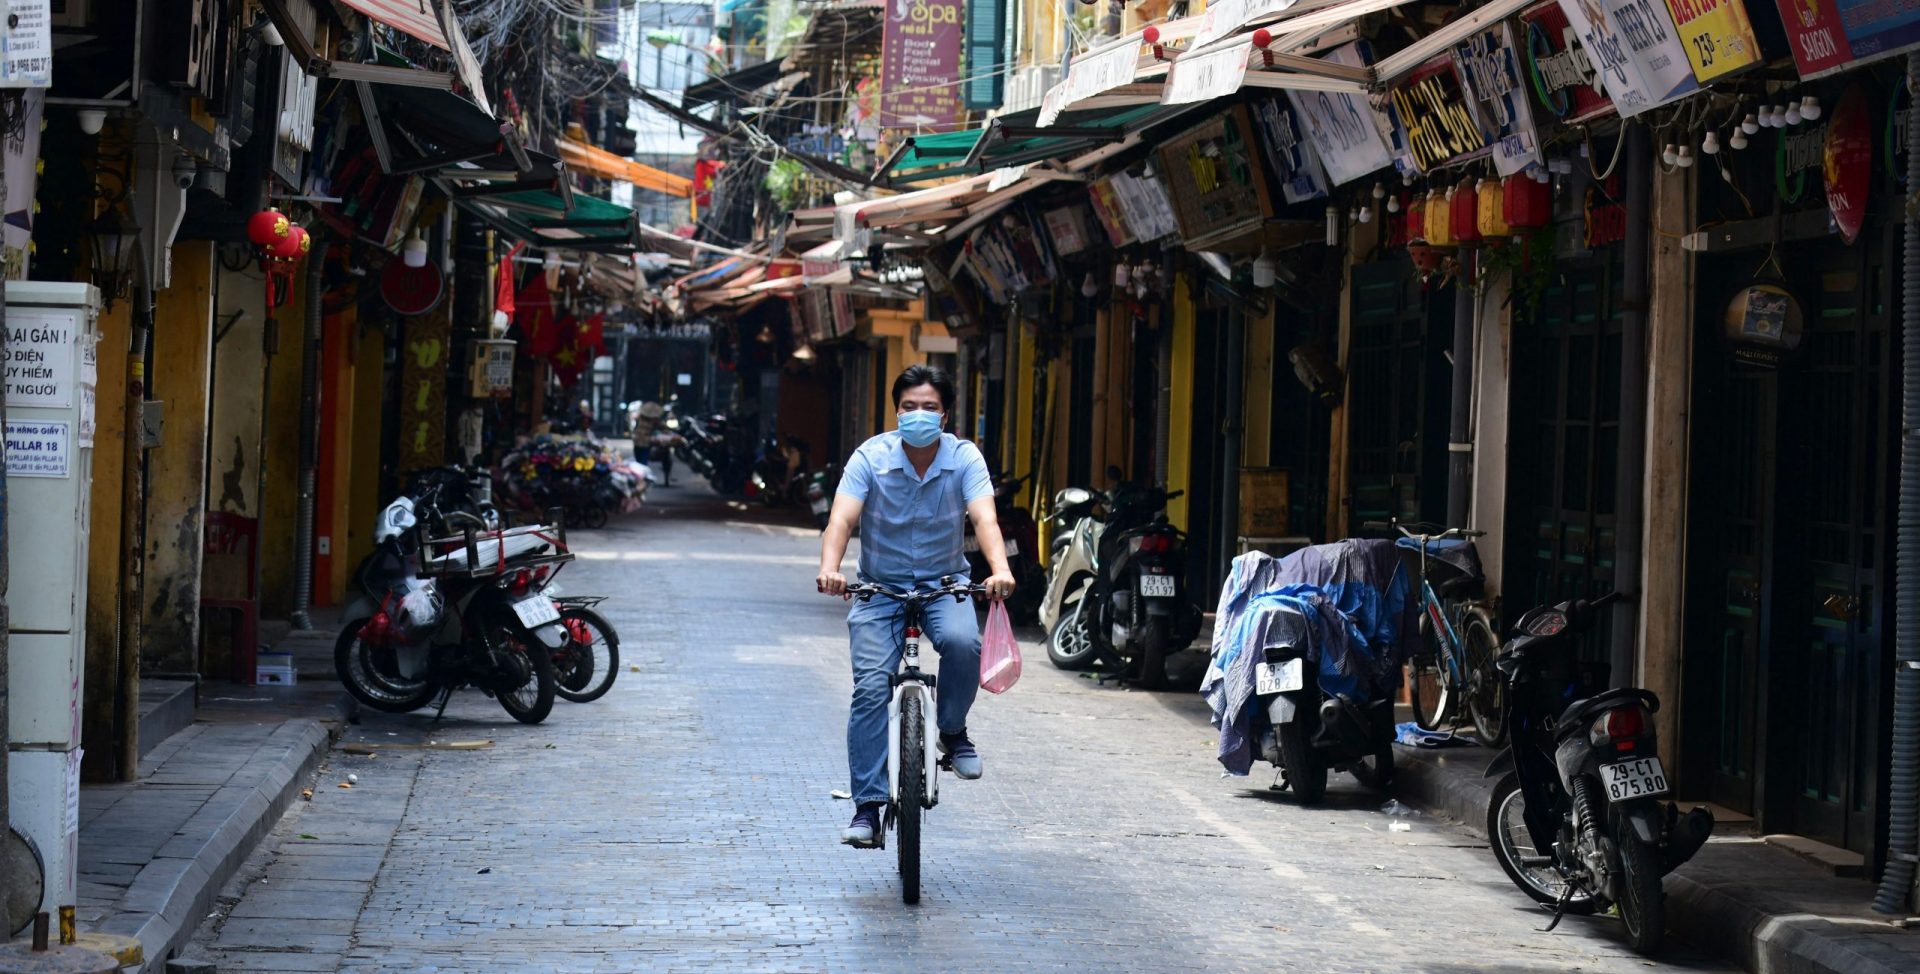 A man rides a bicycle on an empty street amid lockdown restrictions due to a surge in Covid-19 coronavirus cases in Hanoi on May 10, 2021.